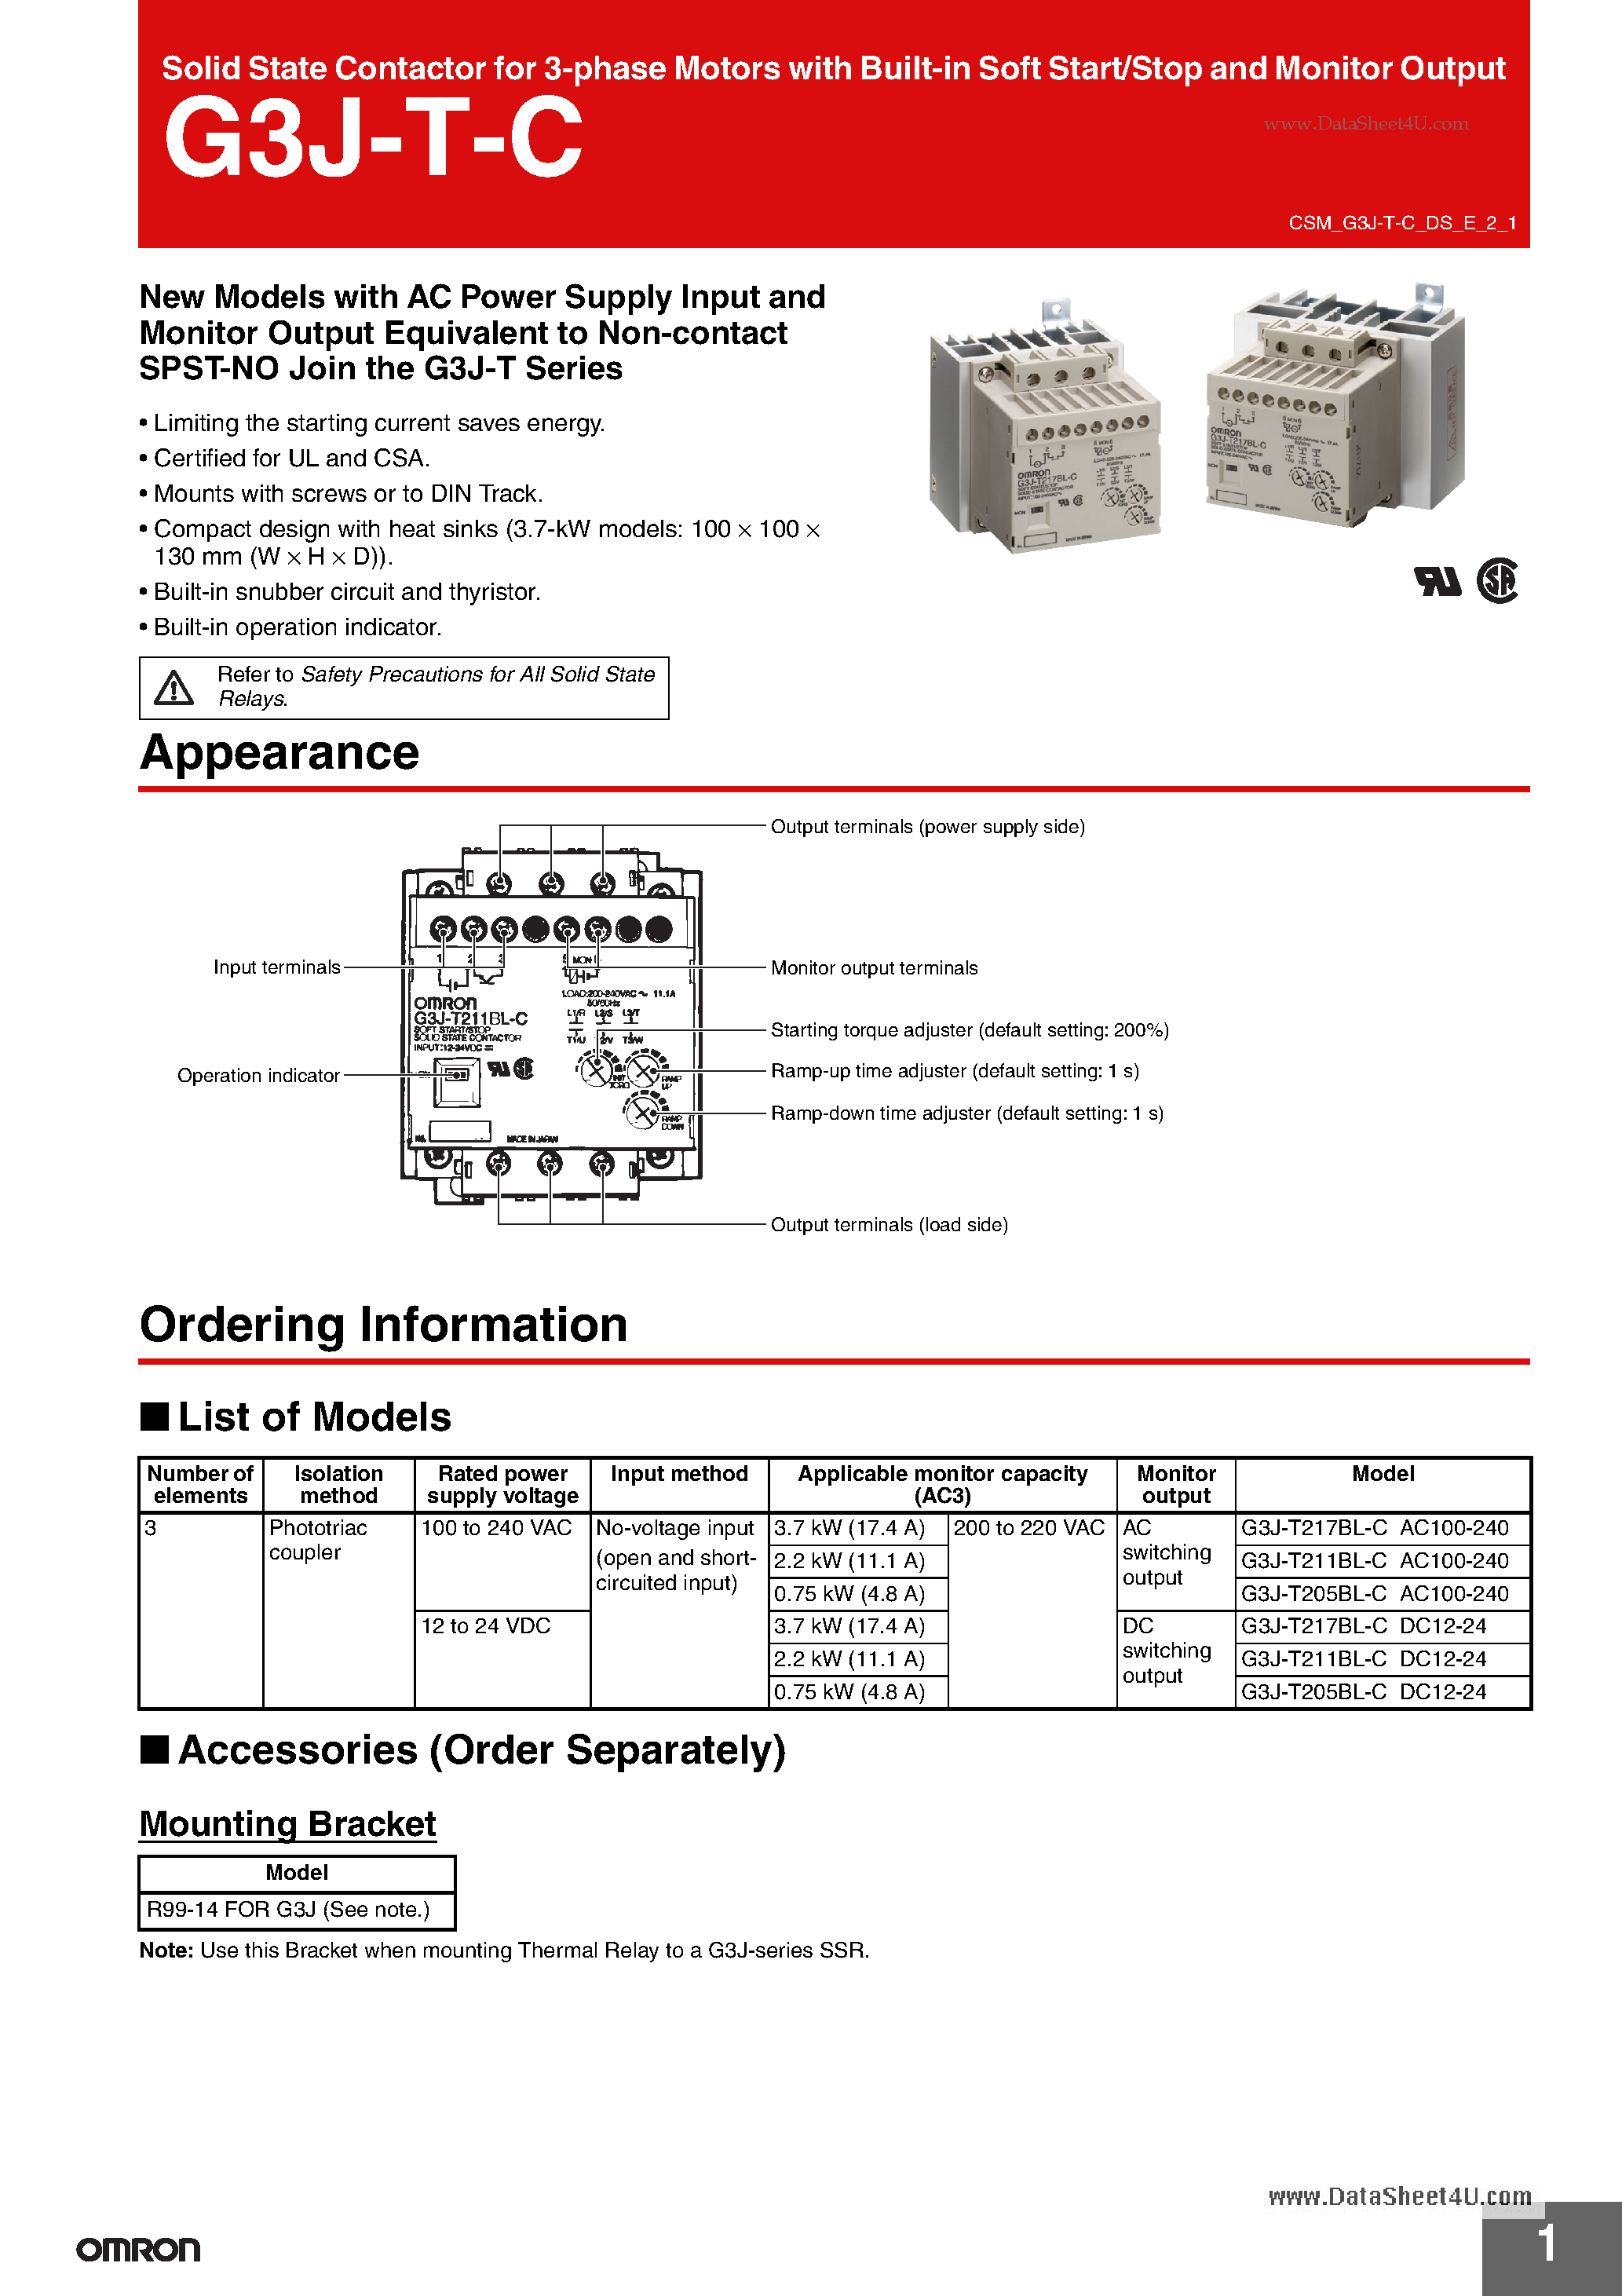 Datasheet G3J-T-C - Solid State Contactor for 3-phase Motors page 1